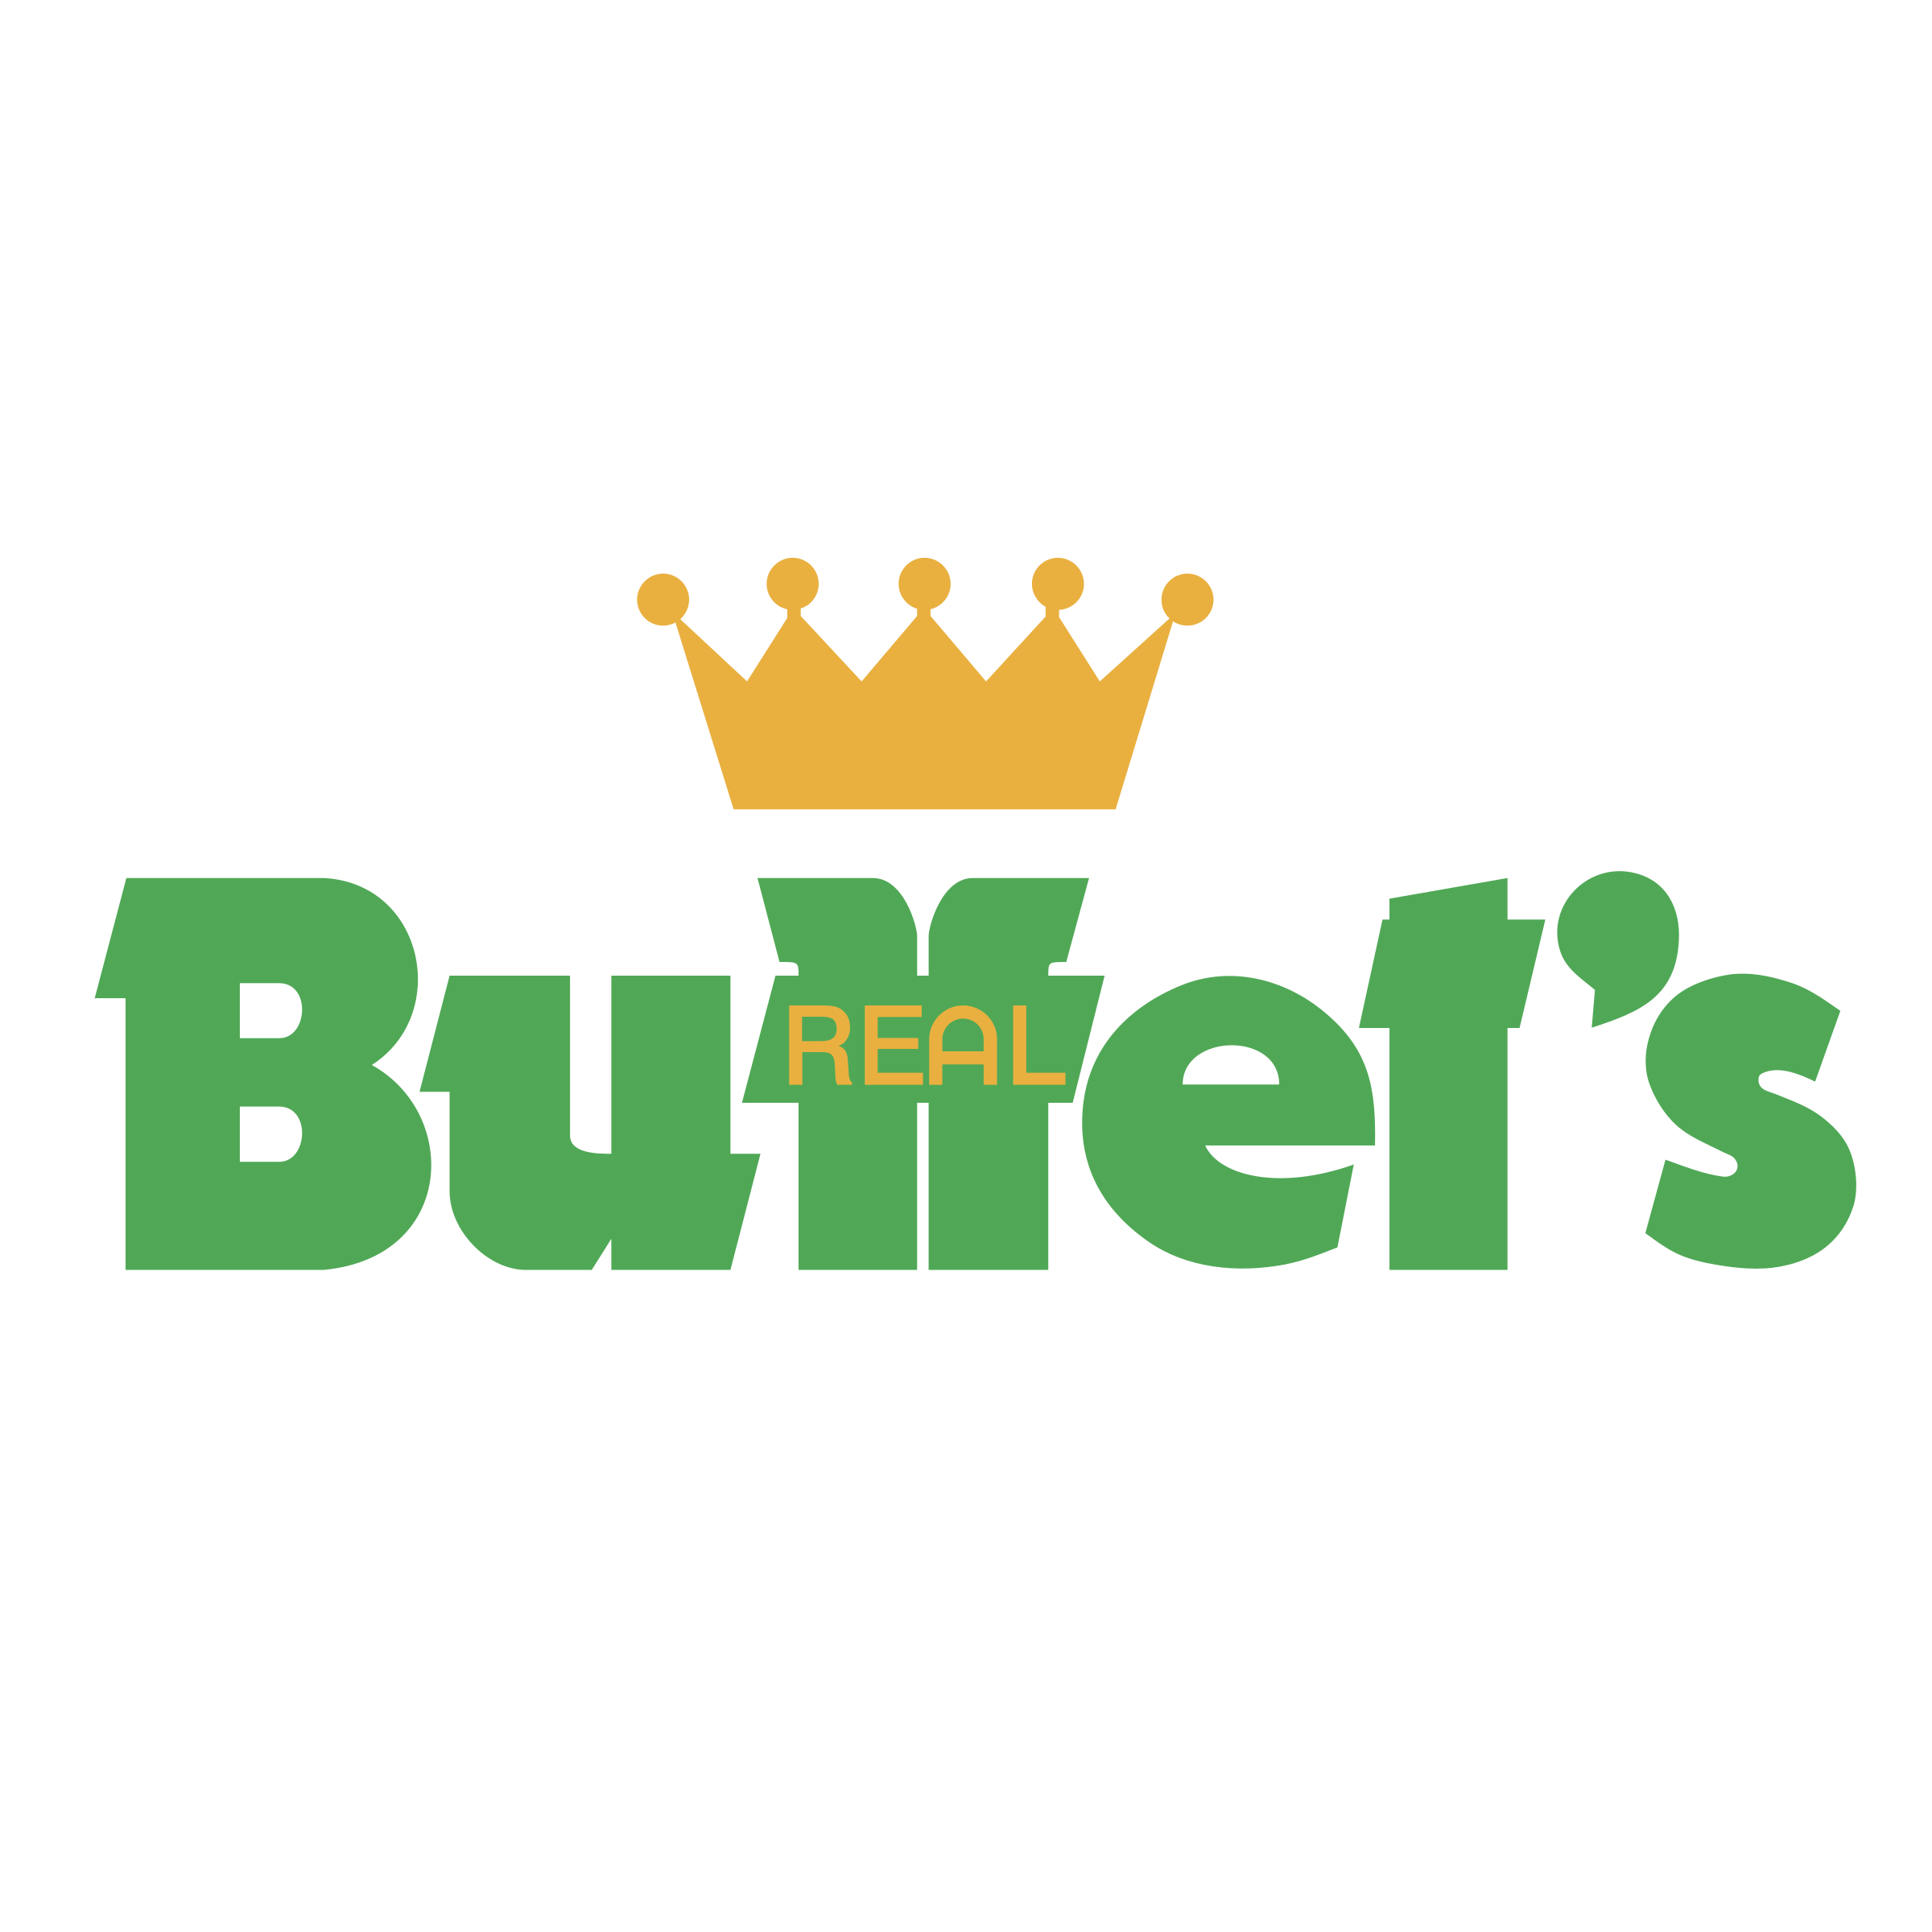 Bffet Logo - Real Buffet's Logo PNG Transparent & SVG Vector - Freebie Supply